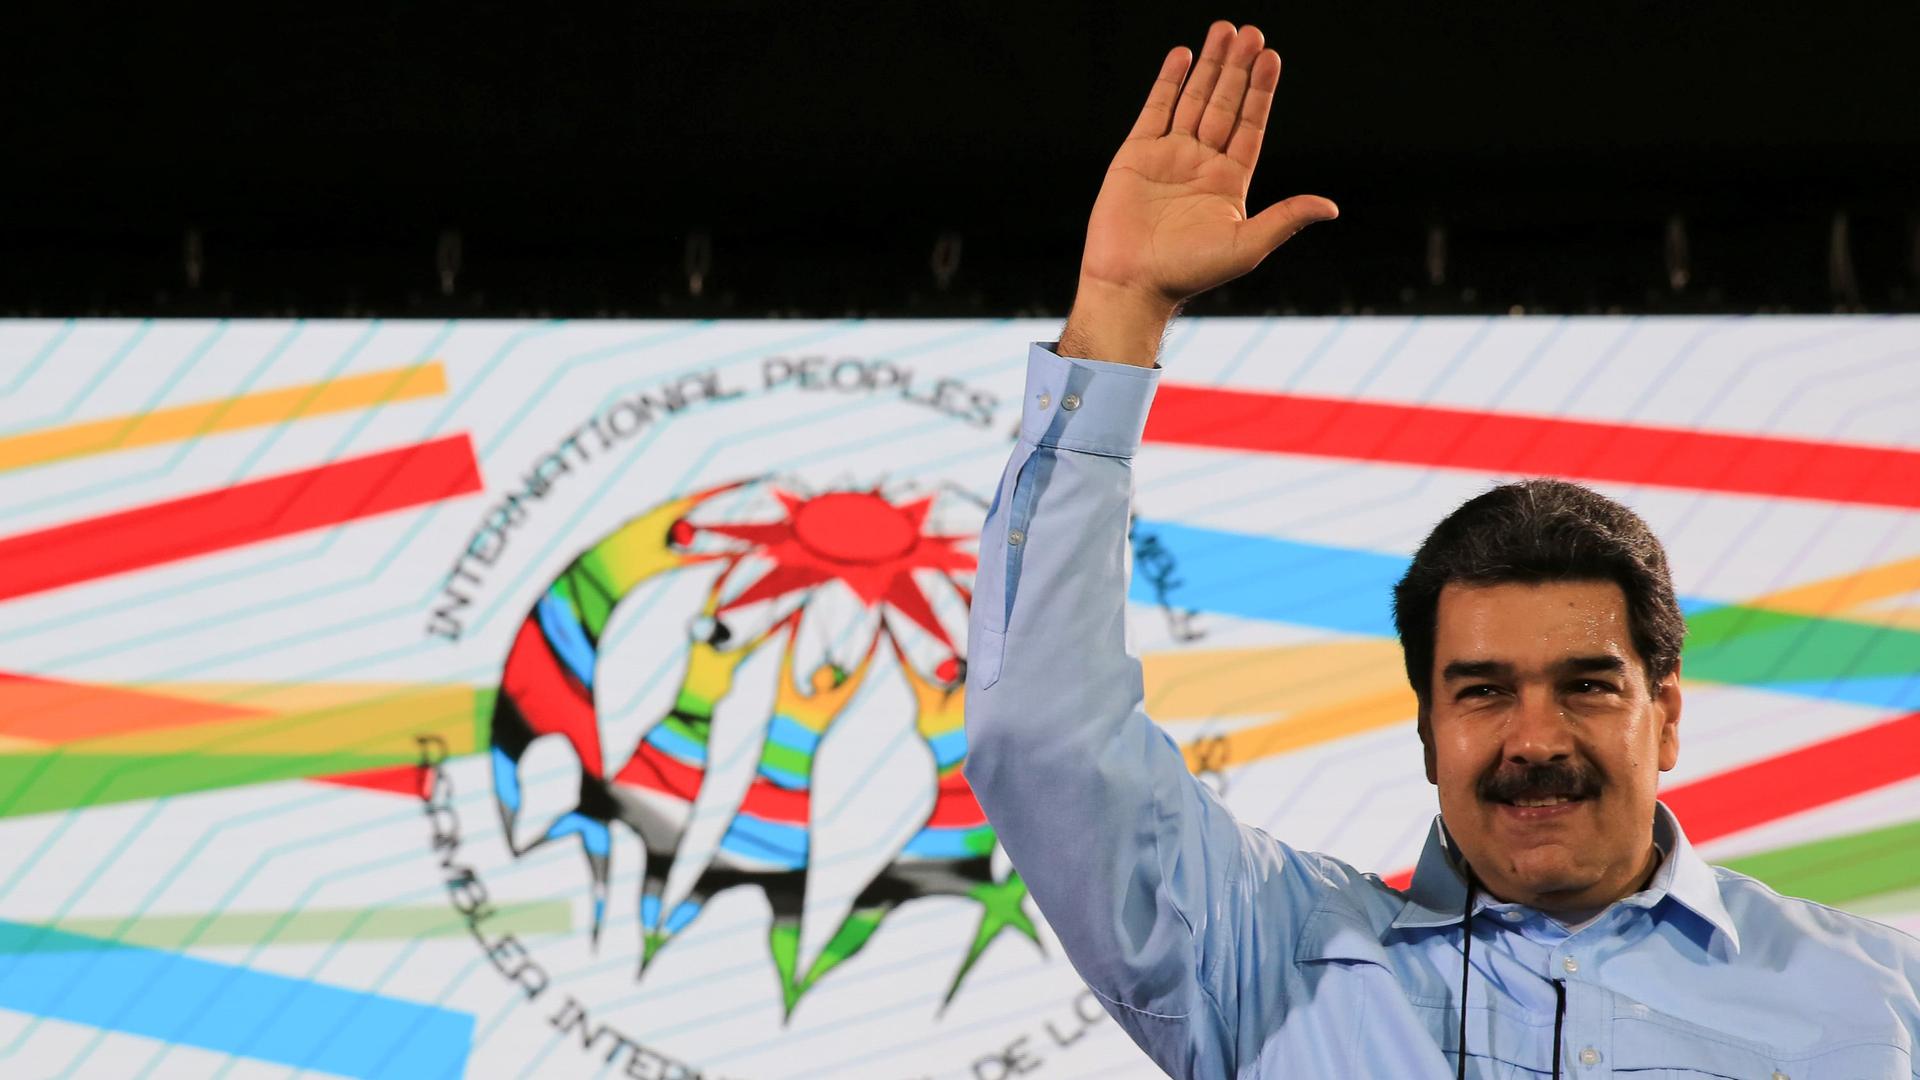 Maduro waves in front of a white flag 